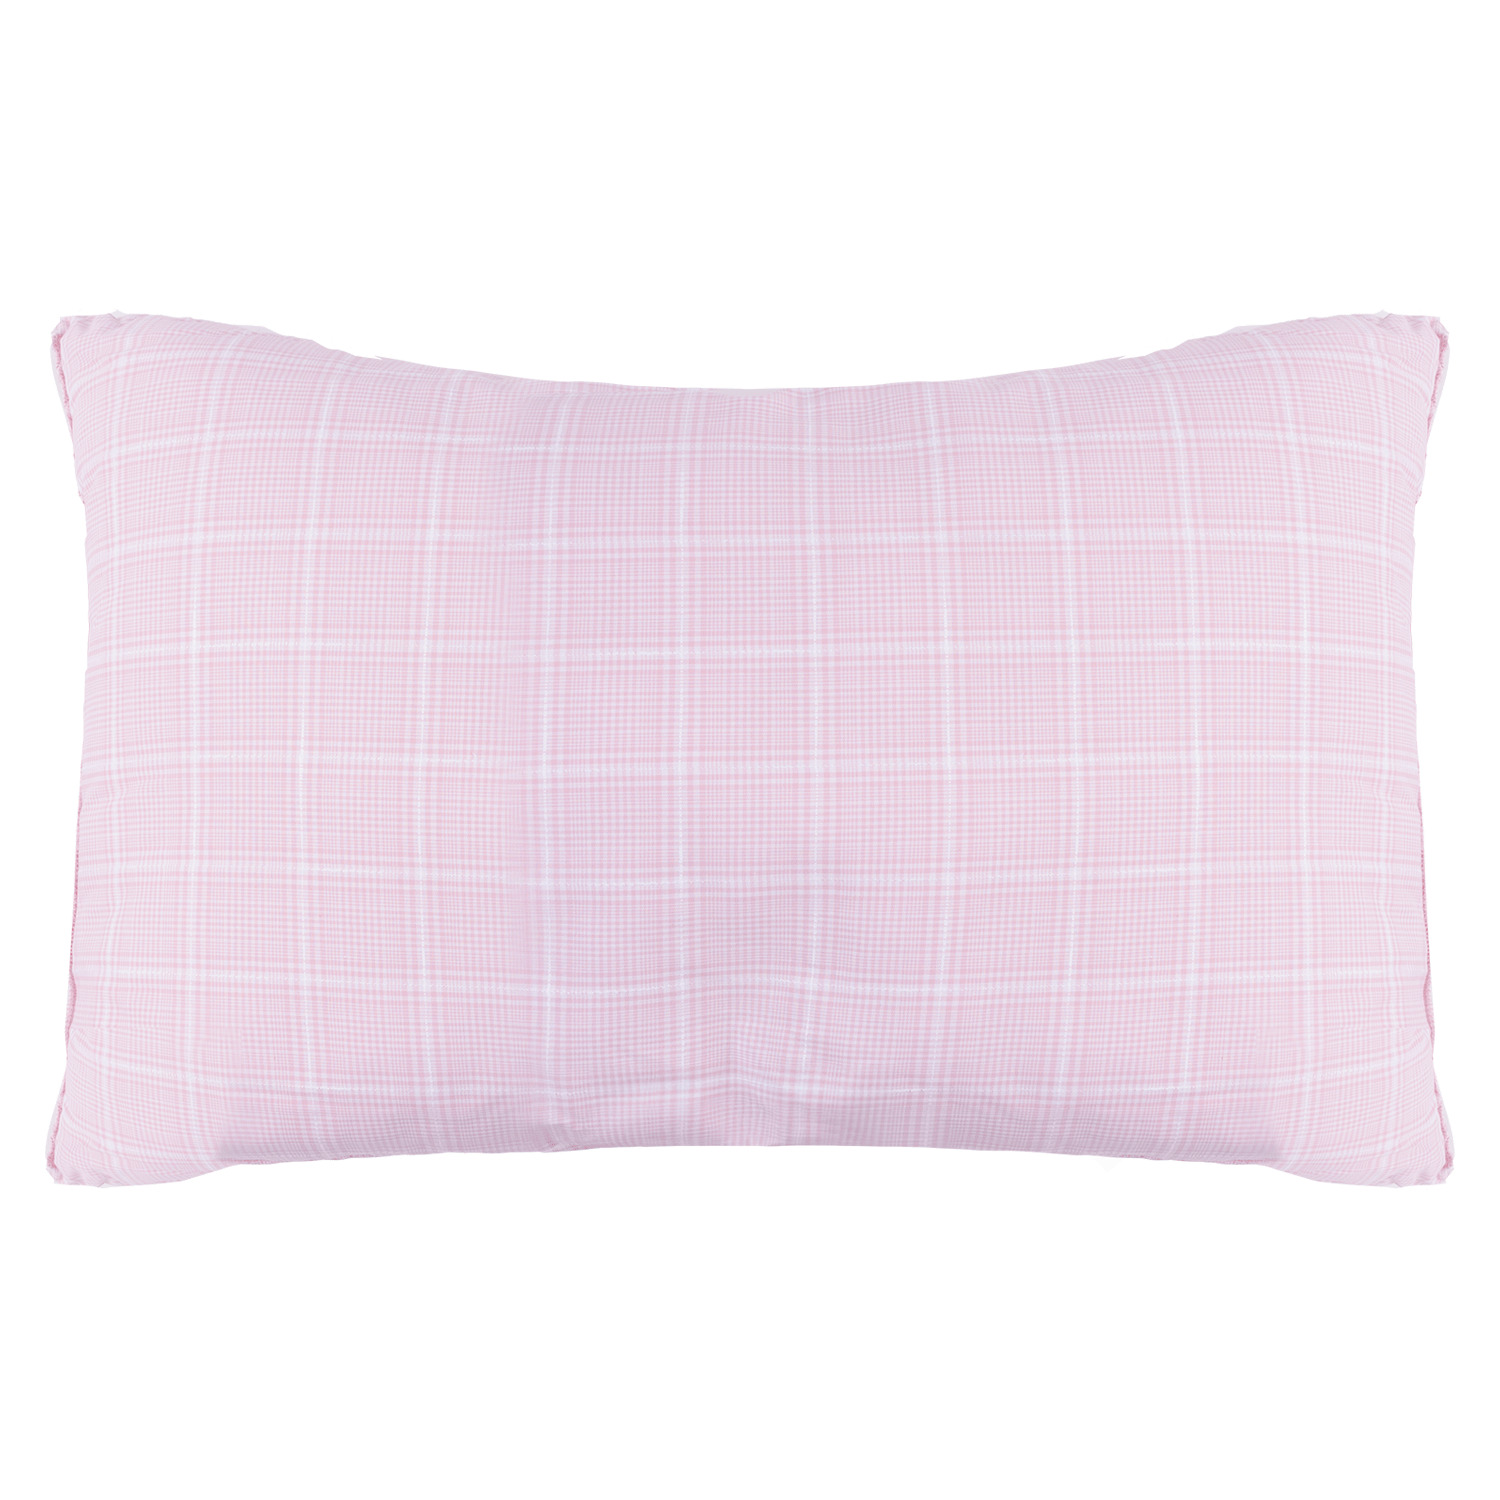 Comfort Collection - Daily comfort pillow, 20"x26" - Standard